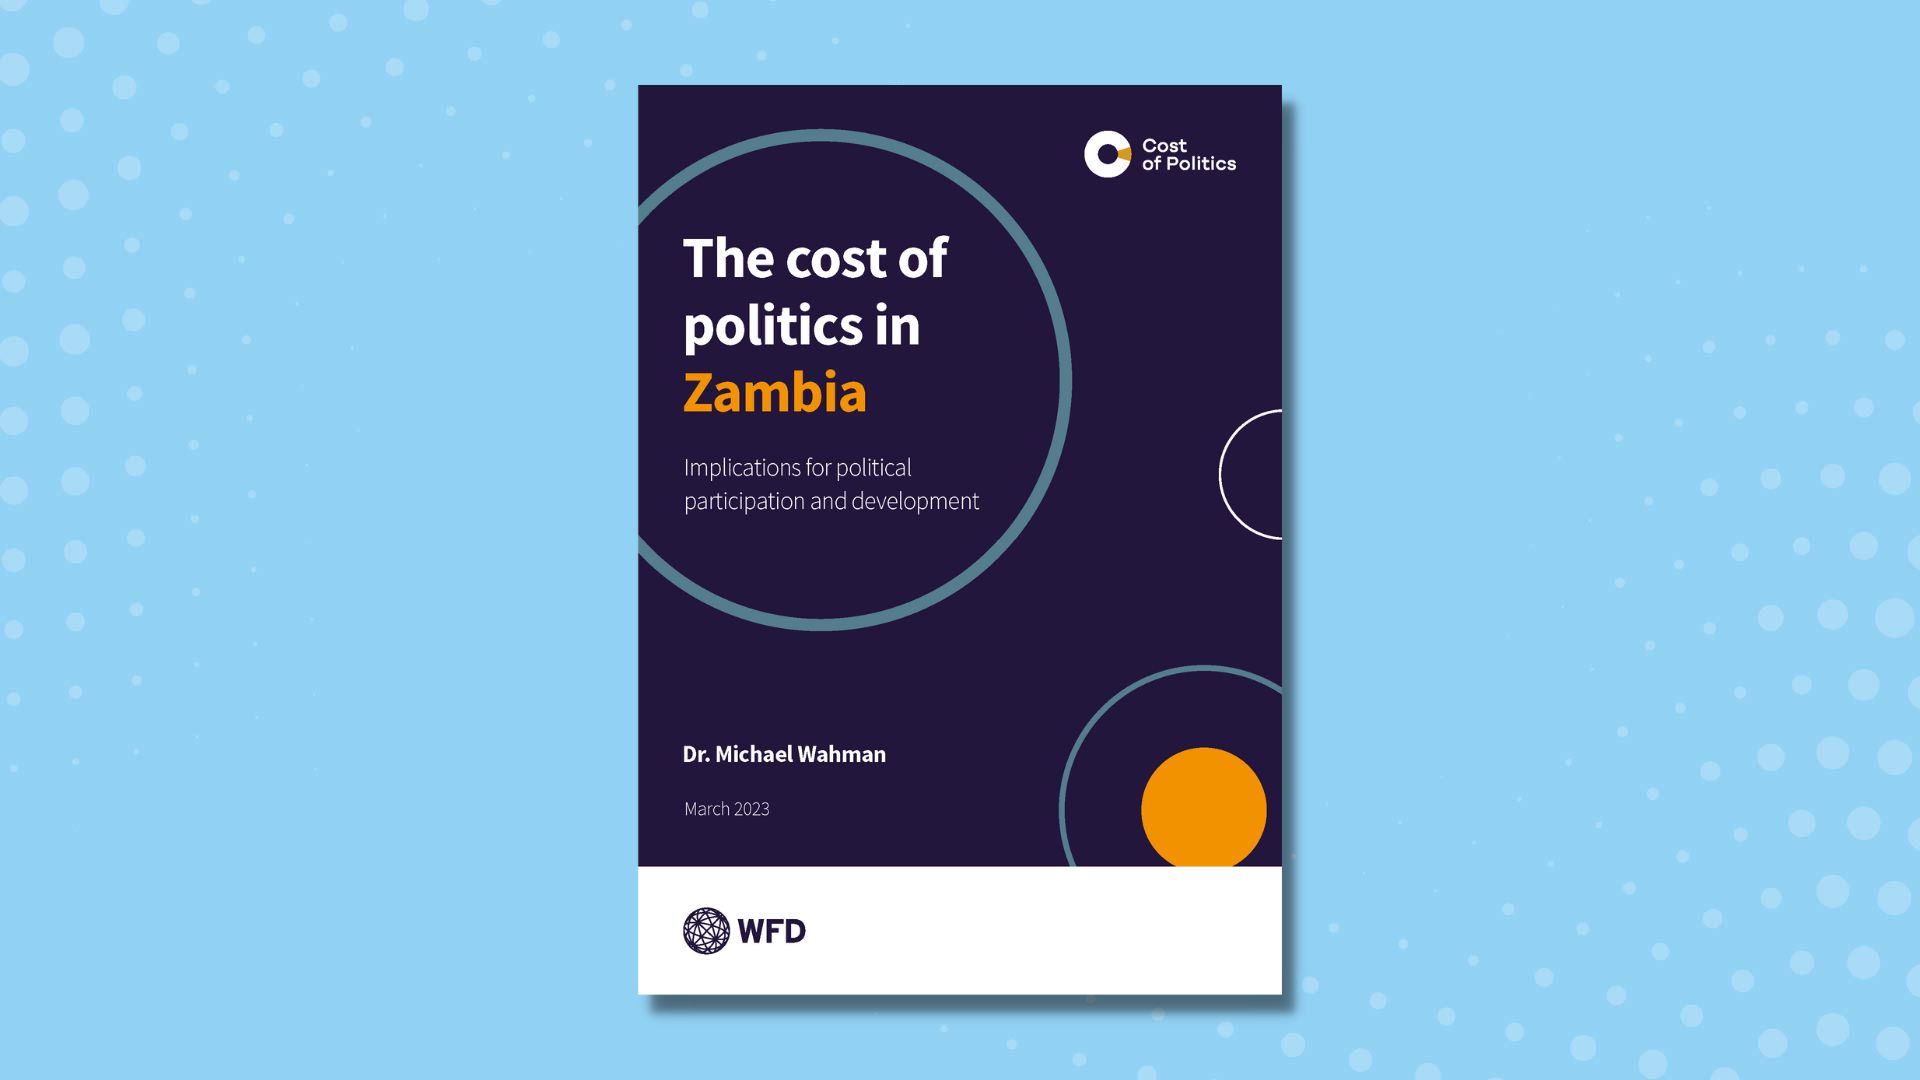 The front cover of the cost of politics in Zambia report